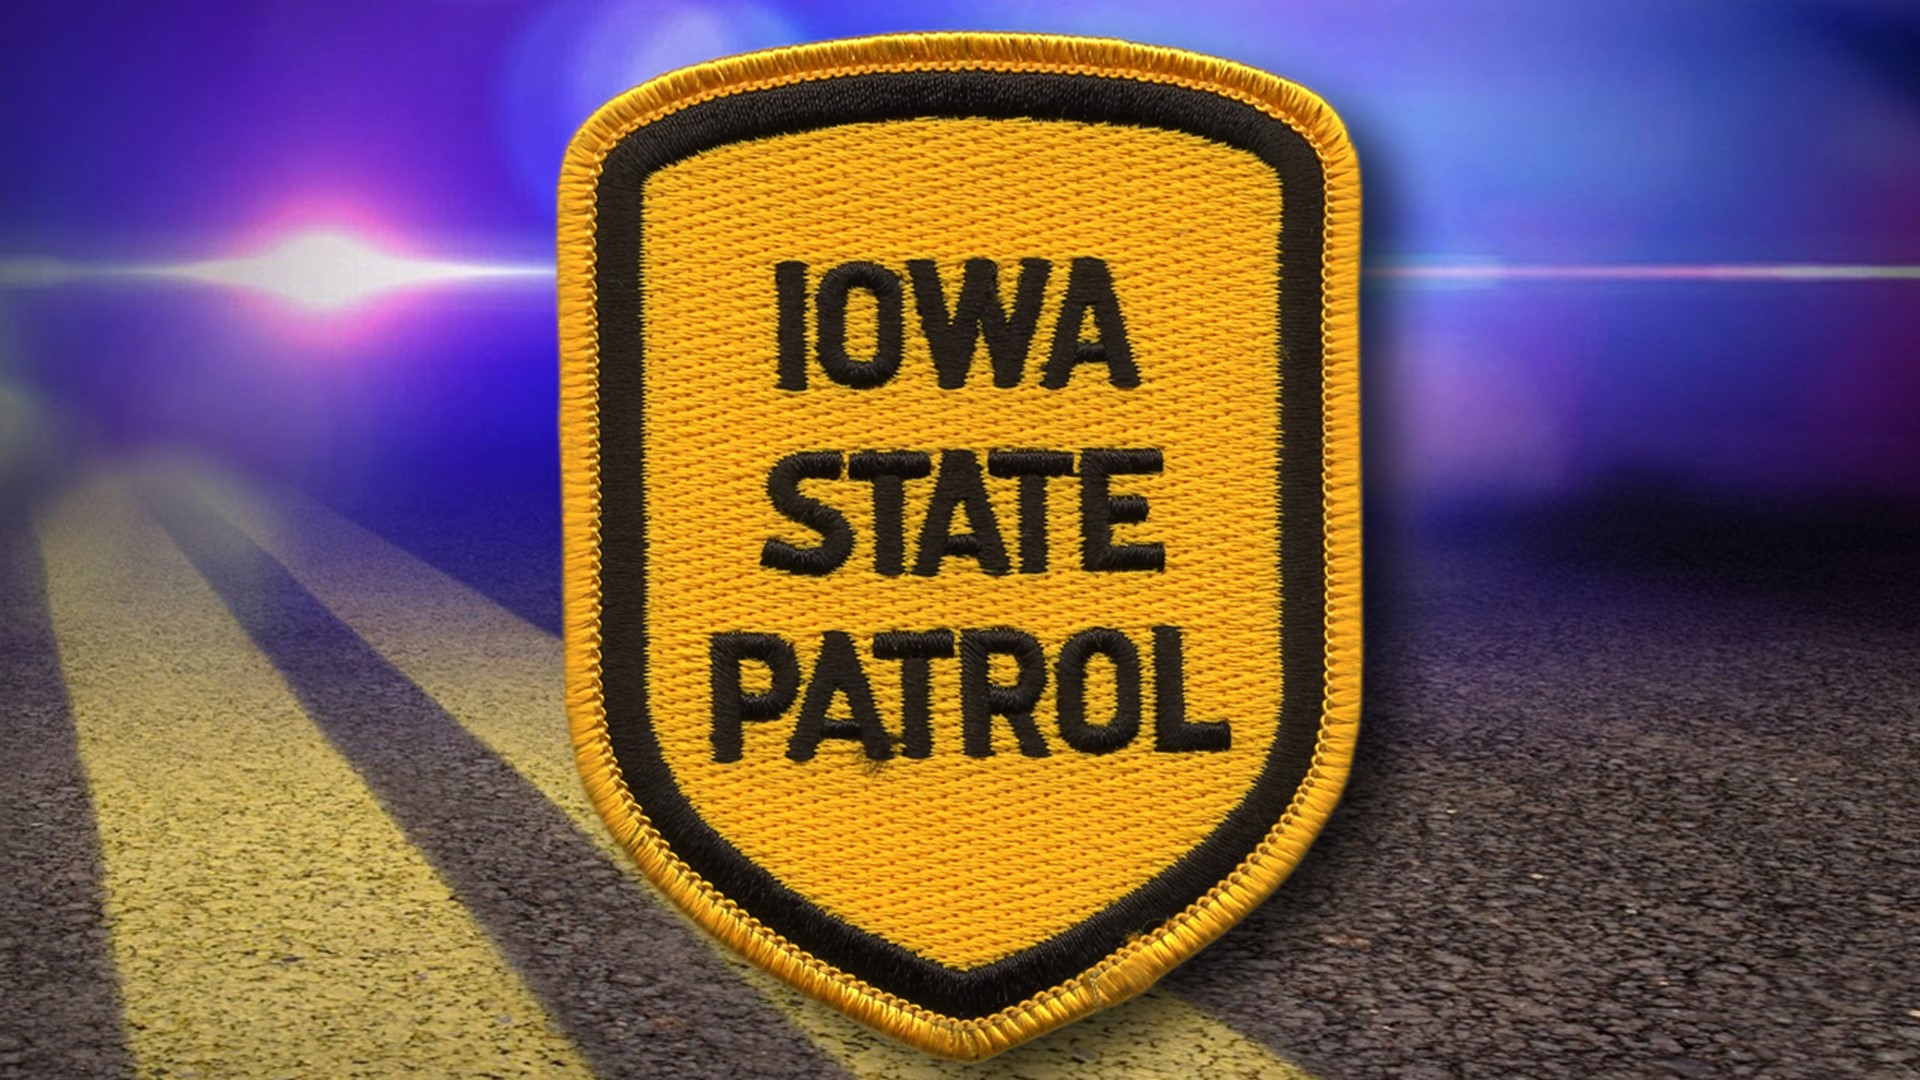 Trooper Ted Benda is in critical condition after a single-vehicle crash Thursday night, according to the Iowa Department of Public Safety.